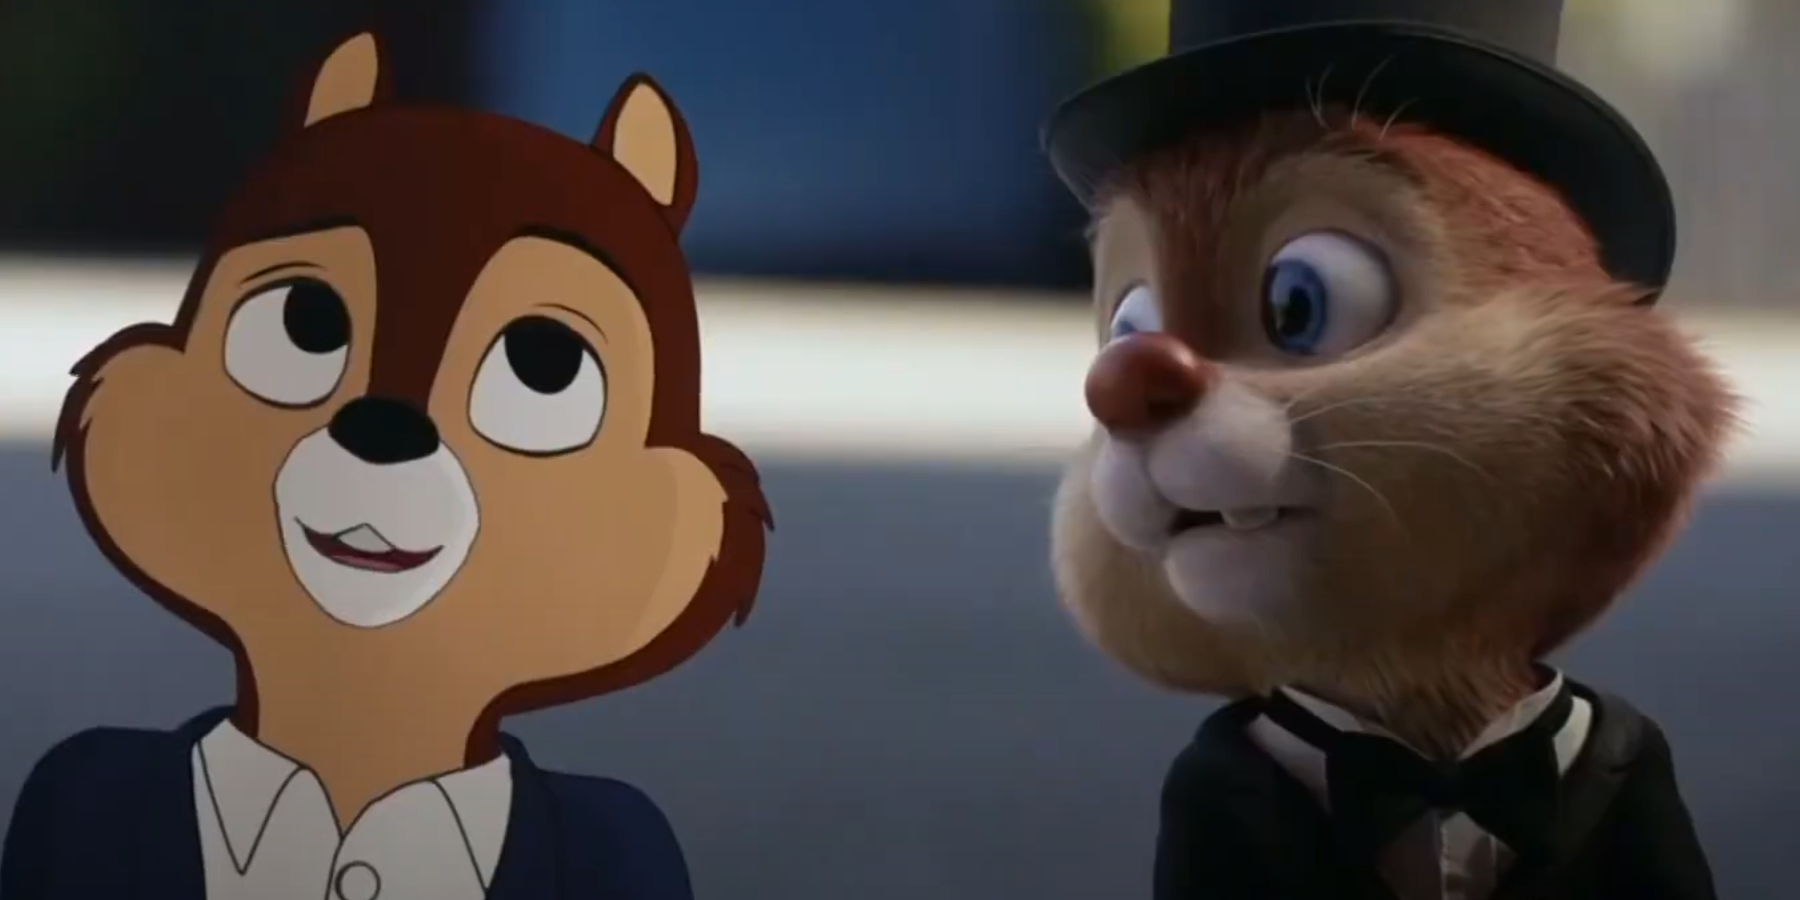 Chip and Dale in Chip 'n Dale: Rescue Rangers.